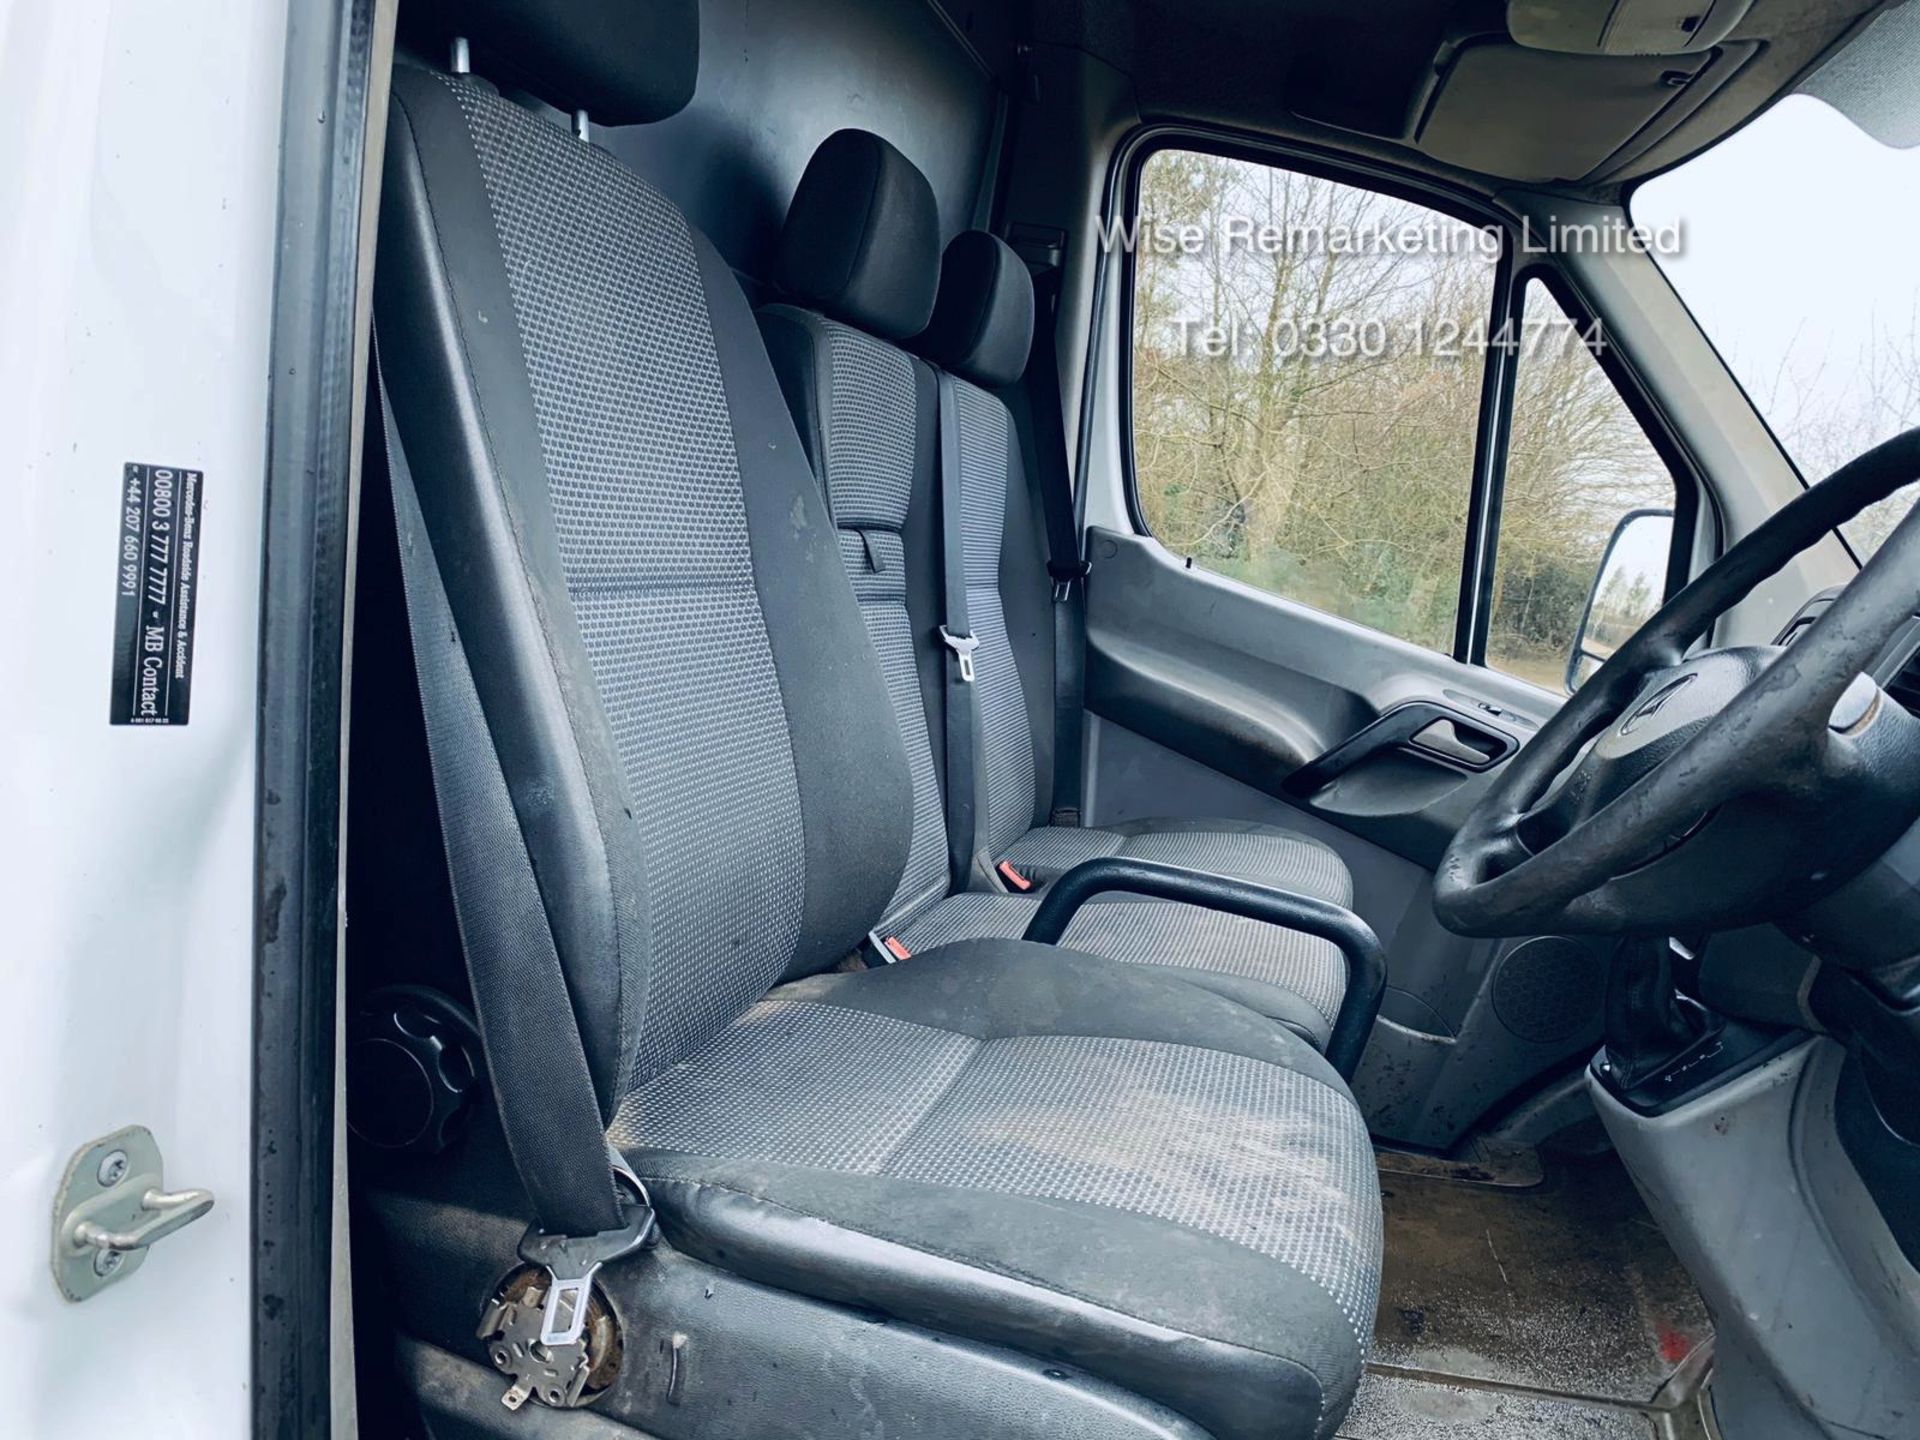 Mercedes Sprinter 313 CDI 2.1 TD *Automatic Triptronic Gearbox* - 2011 Model - Ply Lined - Image 13 of 15